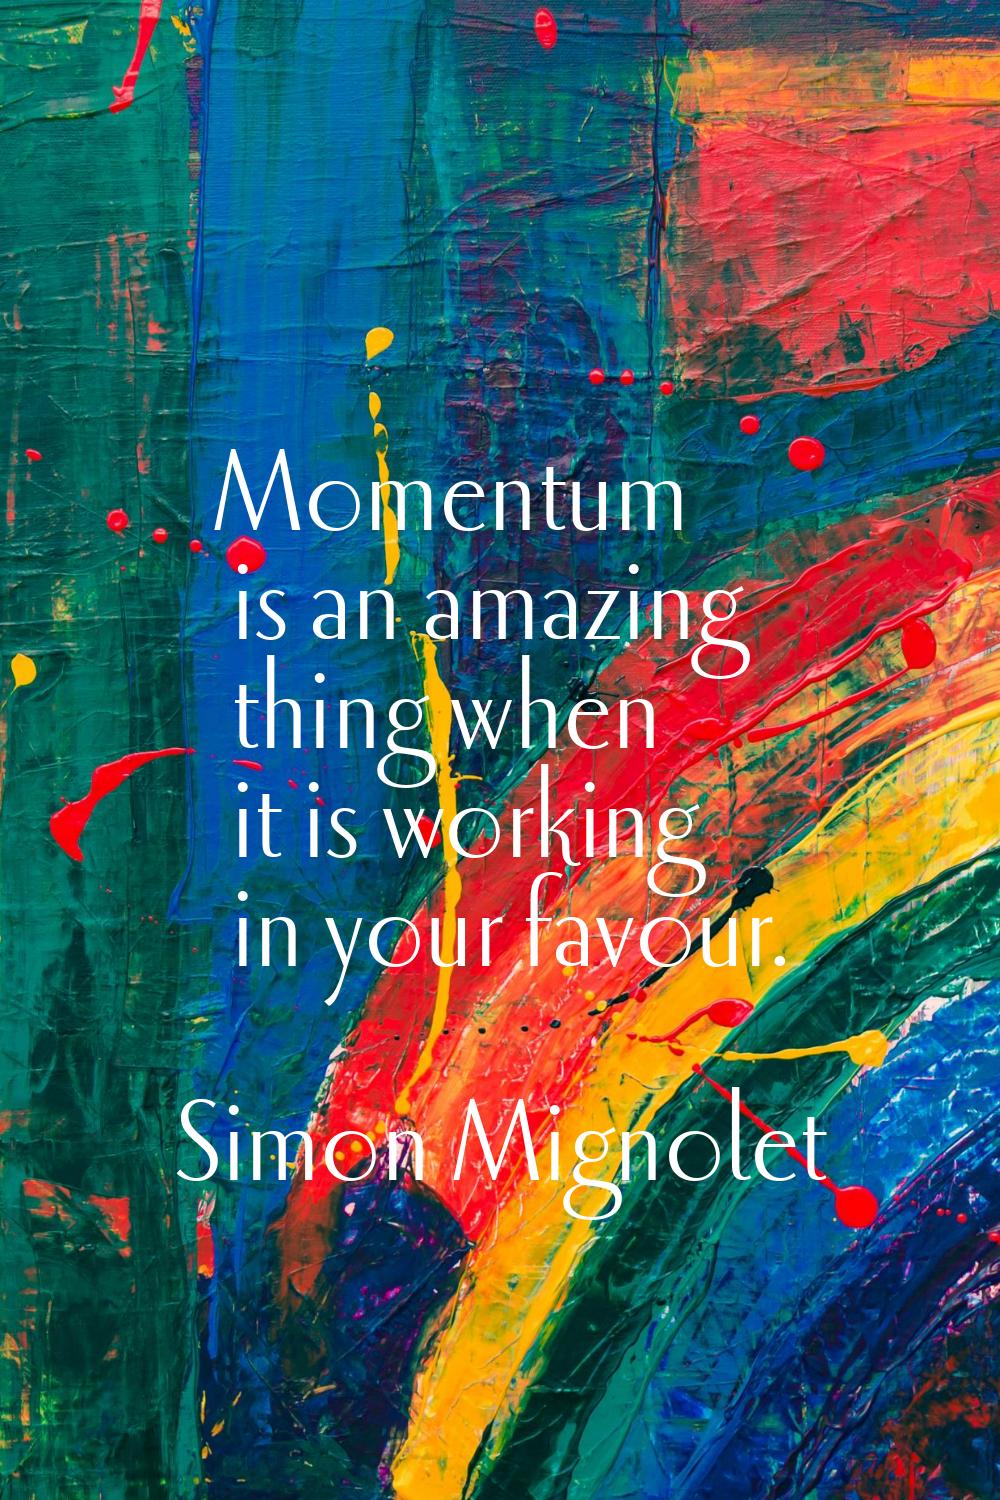 Momentum is an amazing thing when it is working in your favour.